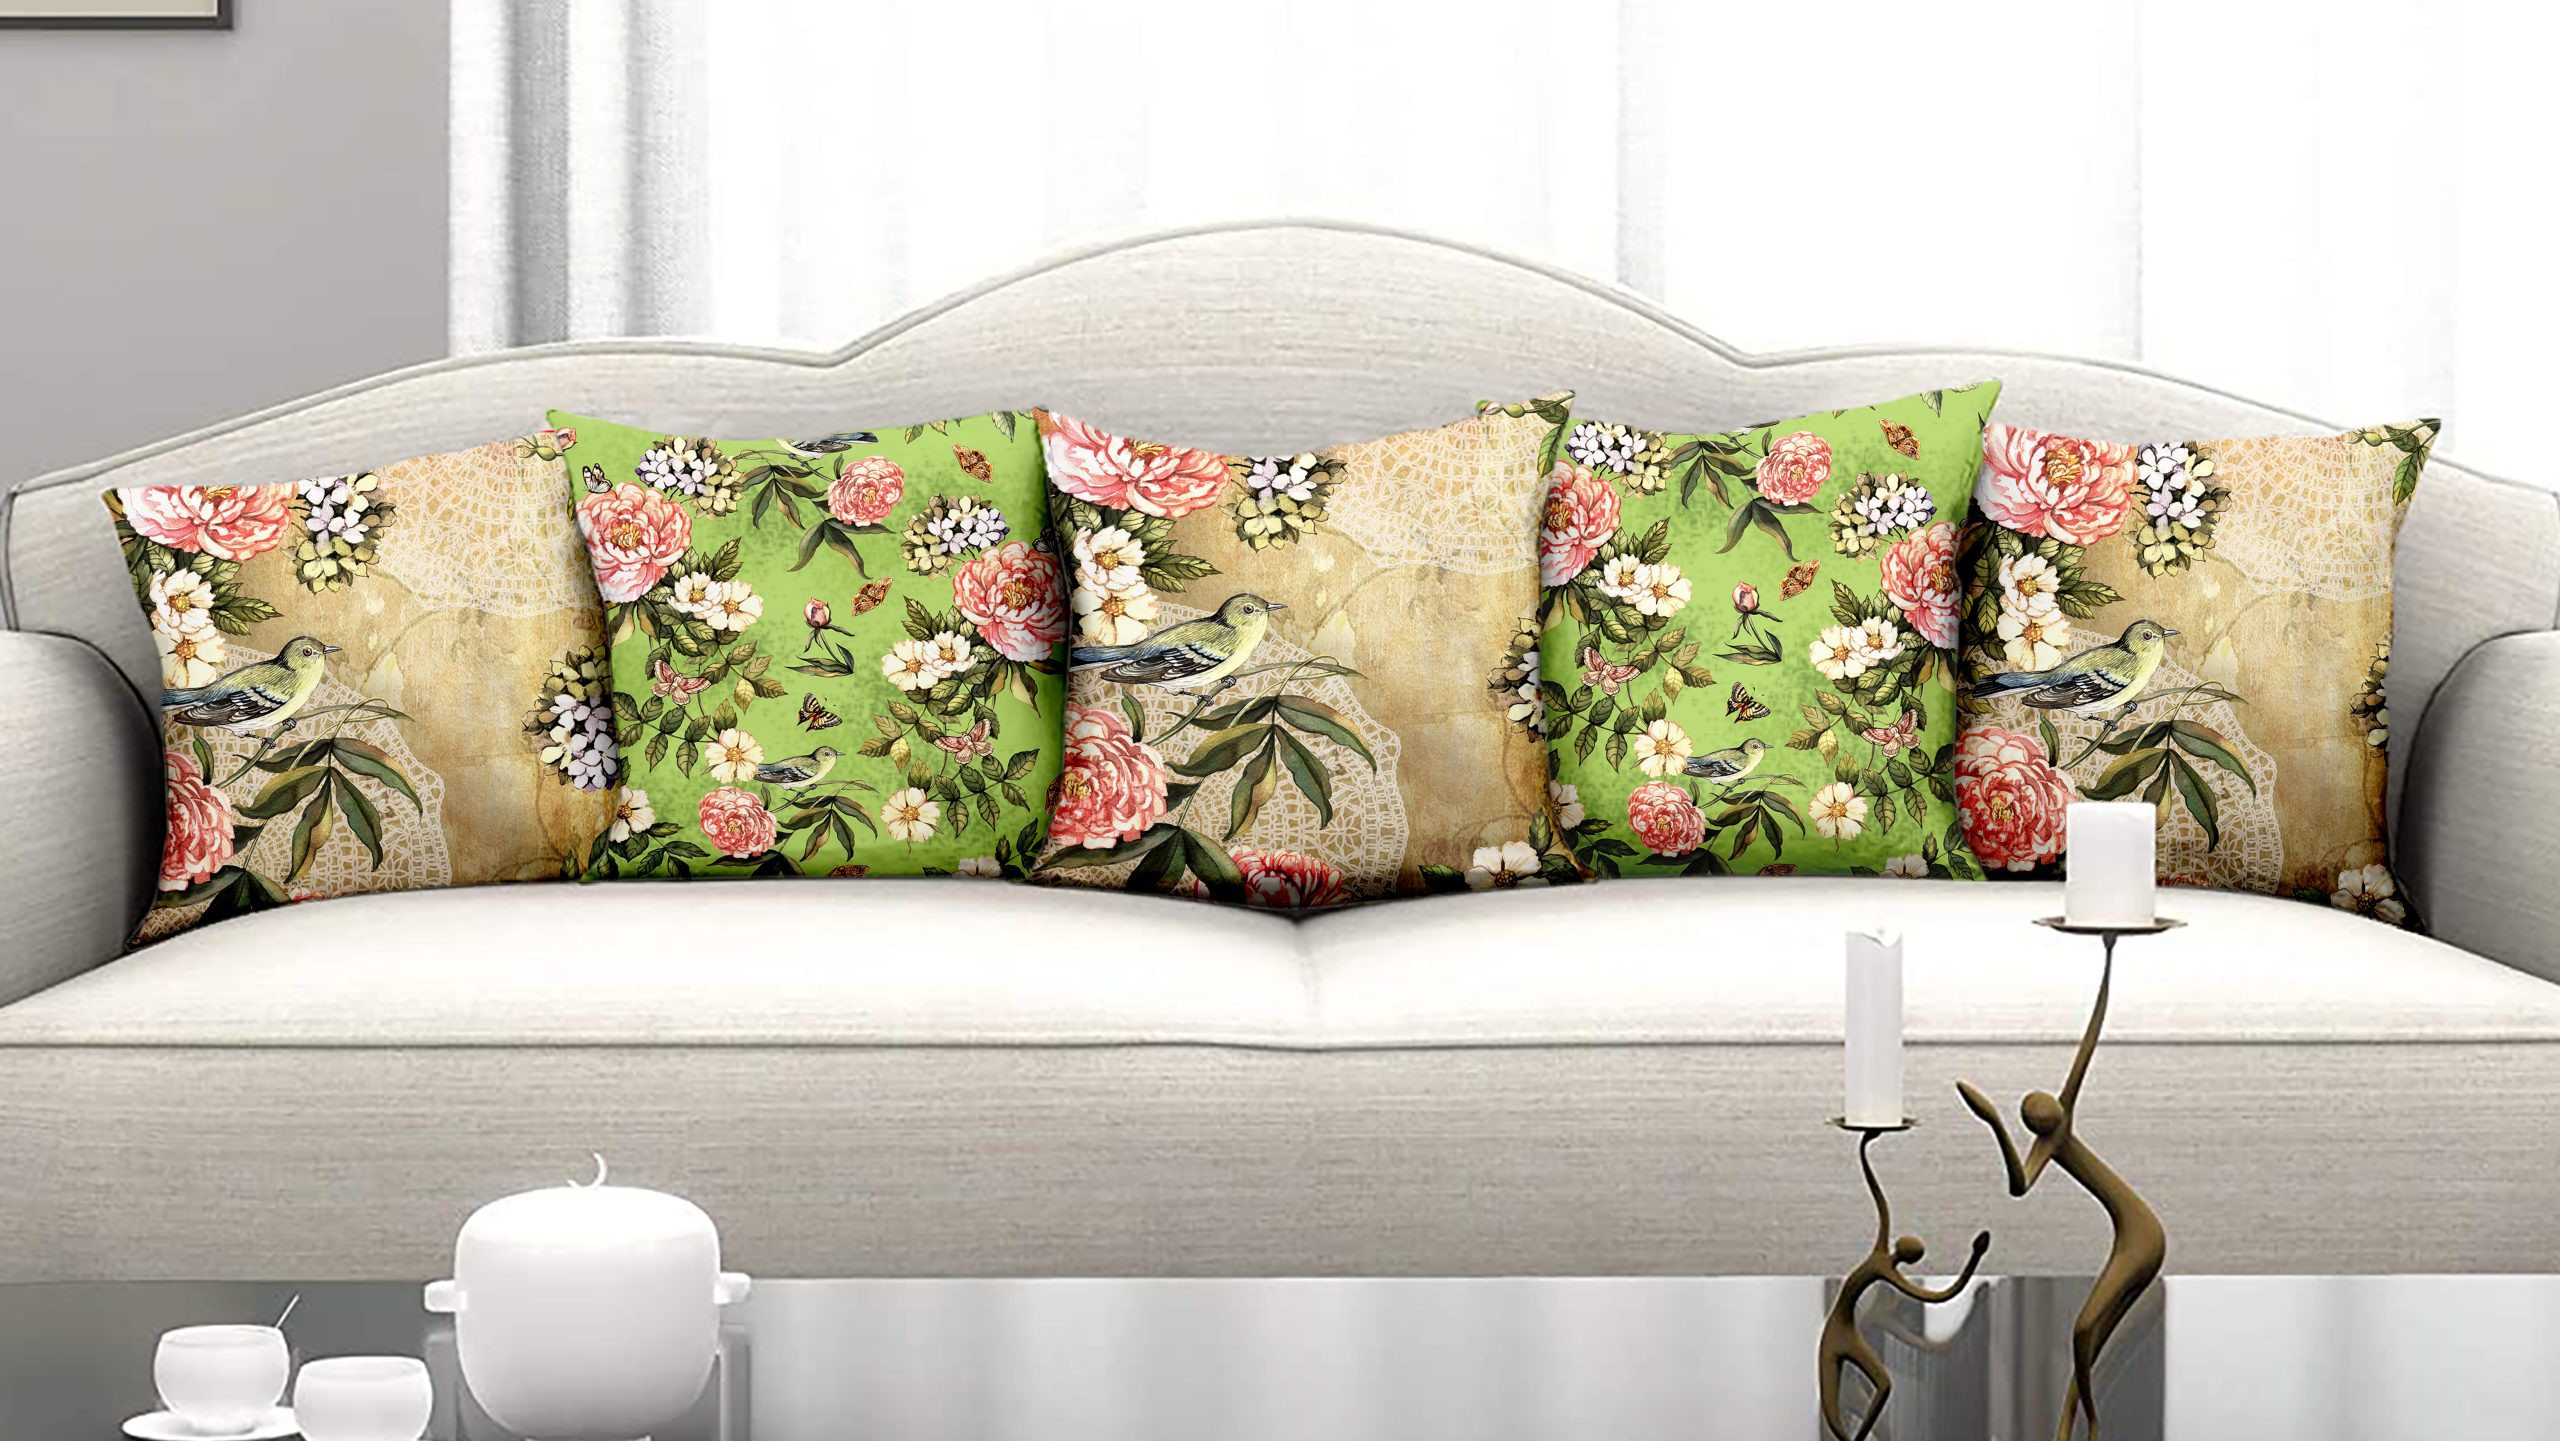 Homewards Bird and Blossom Cushion Cover Set of 5 – Poly Satin, Beige and Green